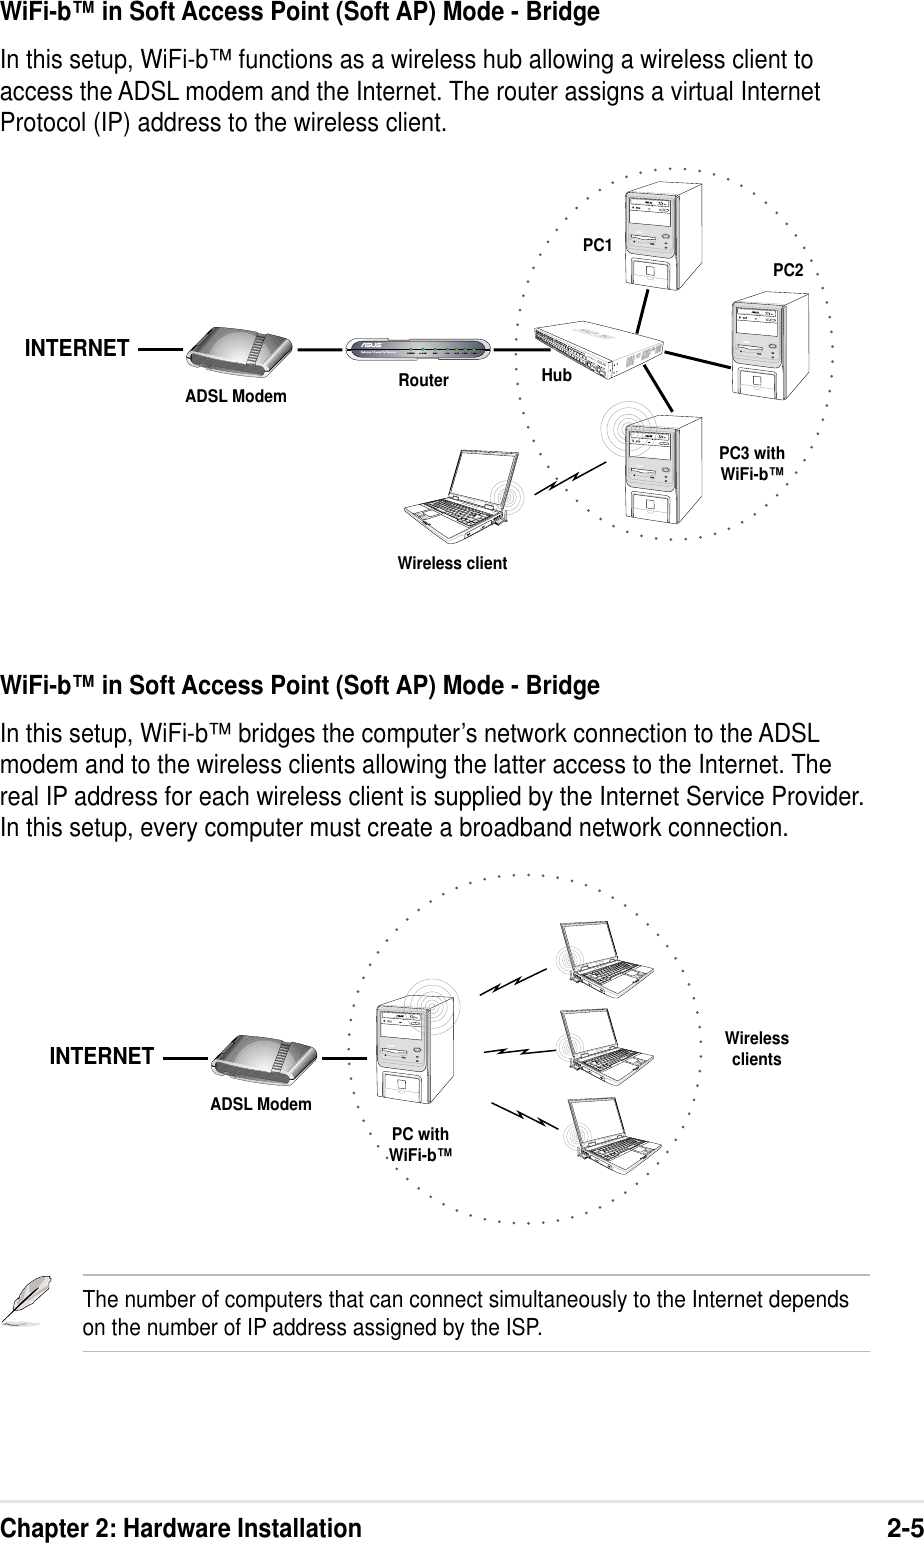 Chapter 2: Hardware Installation2-5ADSL Modem Router HubPC1PC2PC3 withWiFi-b™Wireless clientINTERNETWiFi-b™ in Soft Access Point (Soft AP) Mode - BridgeIn this setup, WiFi-b™ functions as a wireless hub allowing a wireless client toaccess the ADSL modem and the Internet. The router assigns a virtual InternetProtocol (IP) address to the wireless client.WiFi-b™ in Soft Access Point (Soft AP) Mode - BridgeIn this setup, WiFi-b™ bridges the computer’s network connection to the ADSLmodem and to the wireless clients allowing the latter access to the Internet. Thereal IP address for each wireless client is supplied by the Internet Service Provider.In this setup, every computer must create a broadband network connection.ADSL ModemWirelessclientsINTERNETPC withWiFi-b™The number of computers that can connect simultaneously to the Internet dependson the number of IP address assigned by the ISP.